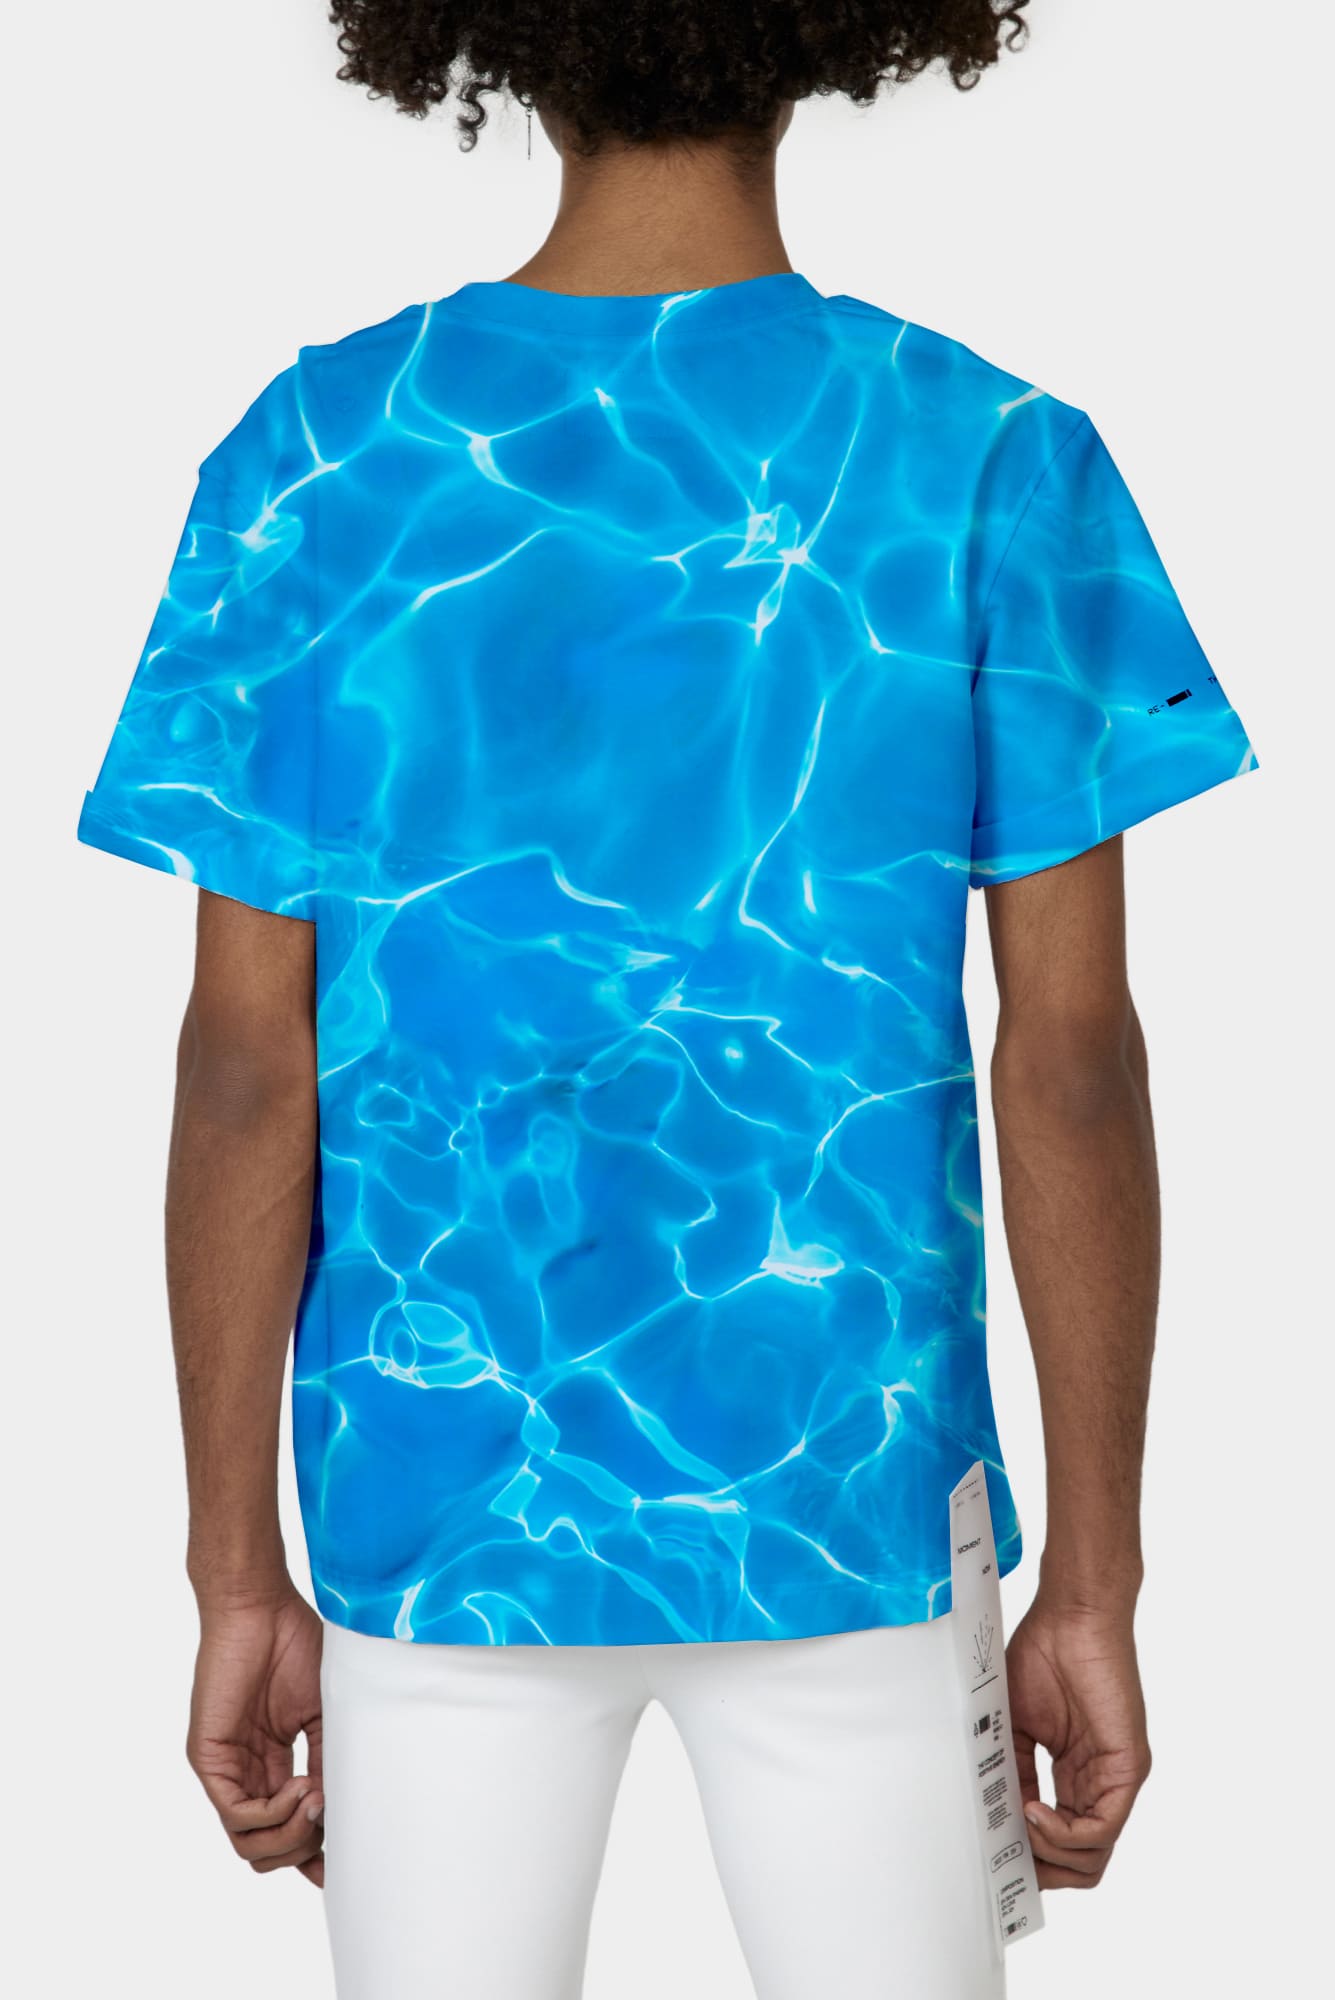 Water T-shirt CHOISE for JOY